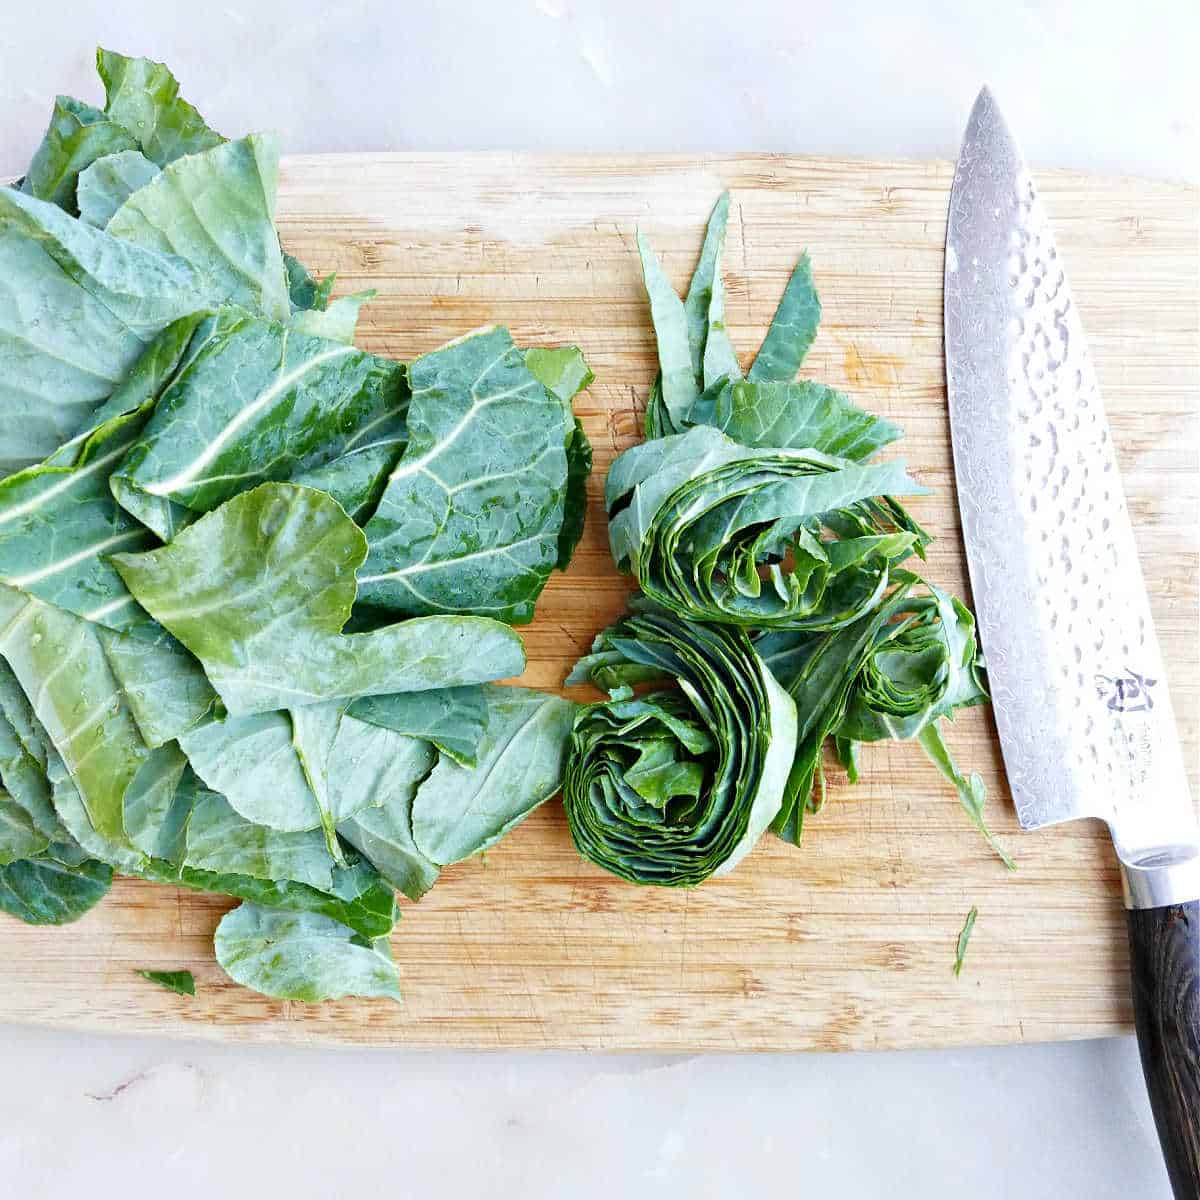 collard greens sliced into strips on a cutting board next to a knife